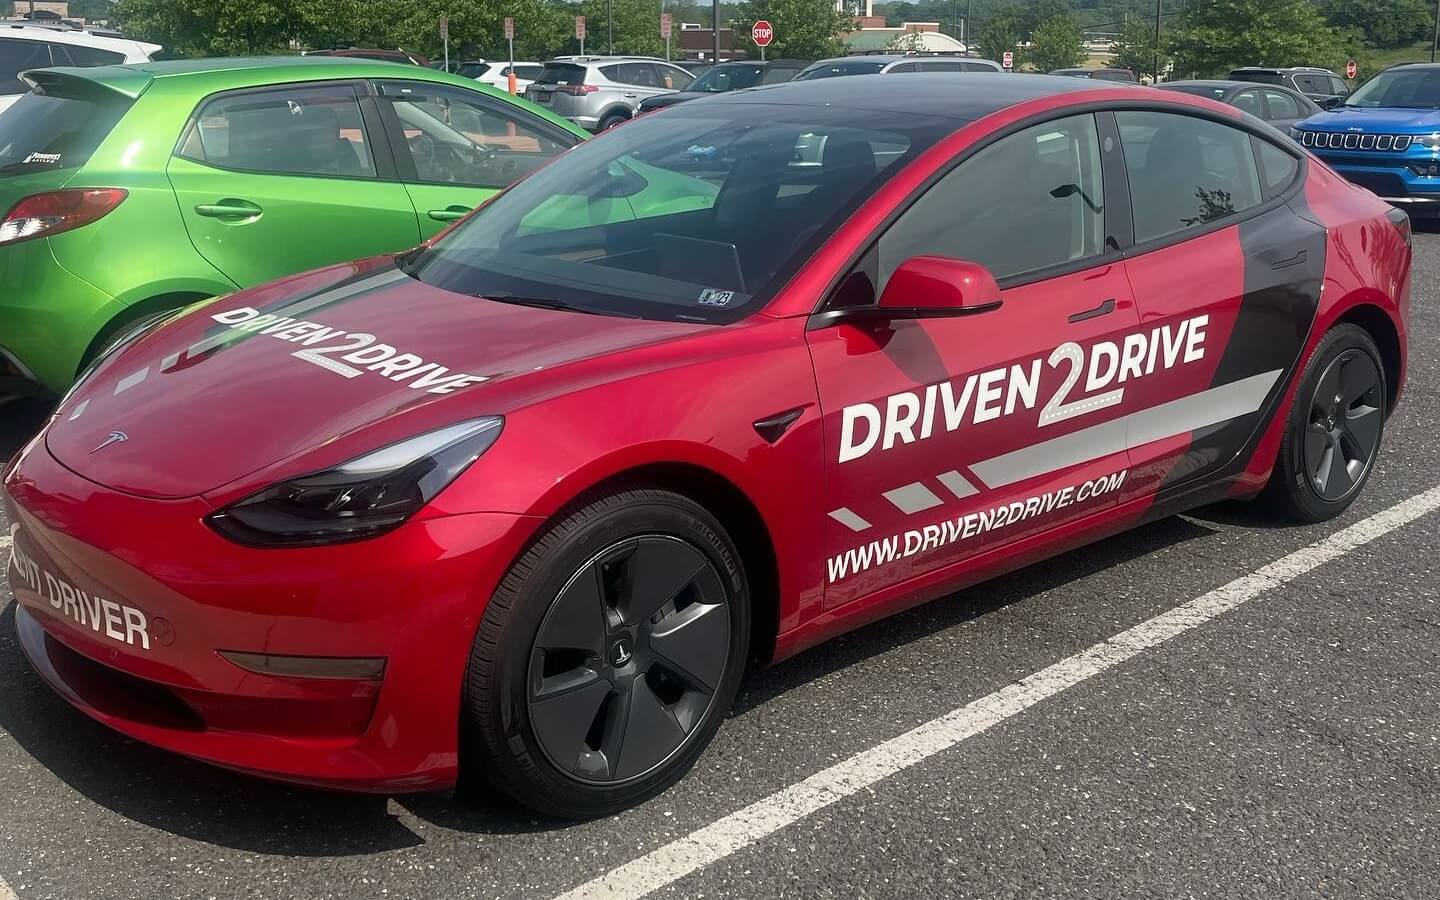 Driven2Drive Tesla for Driving lessons